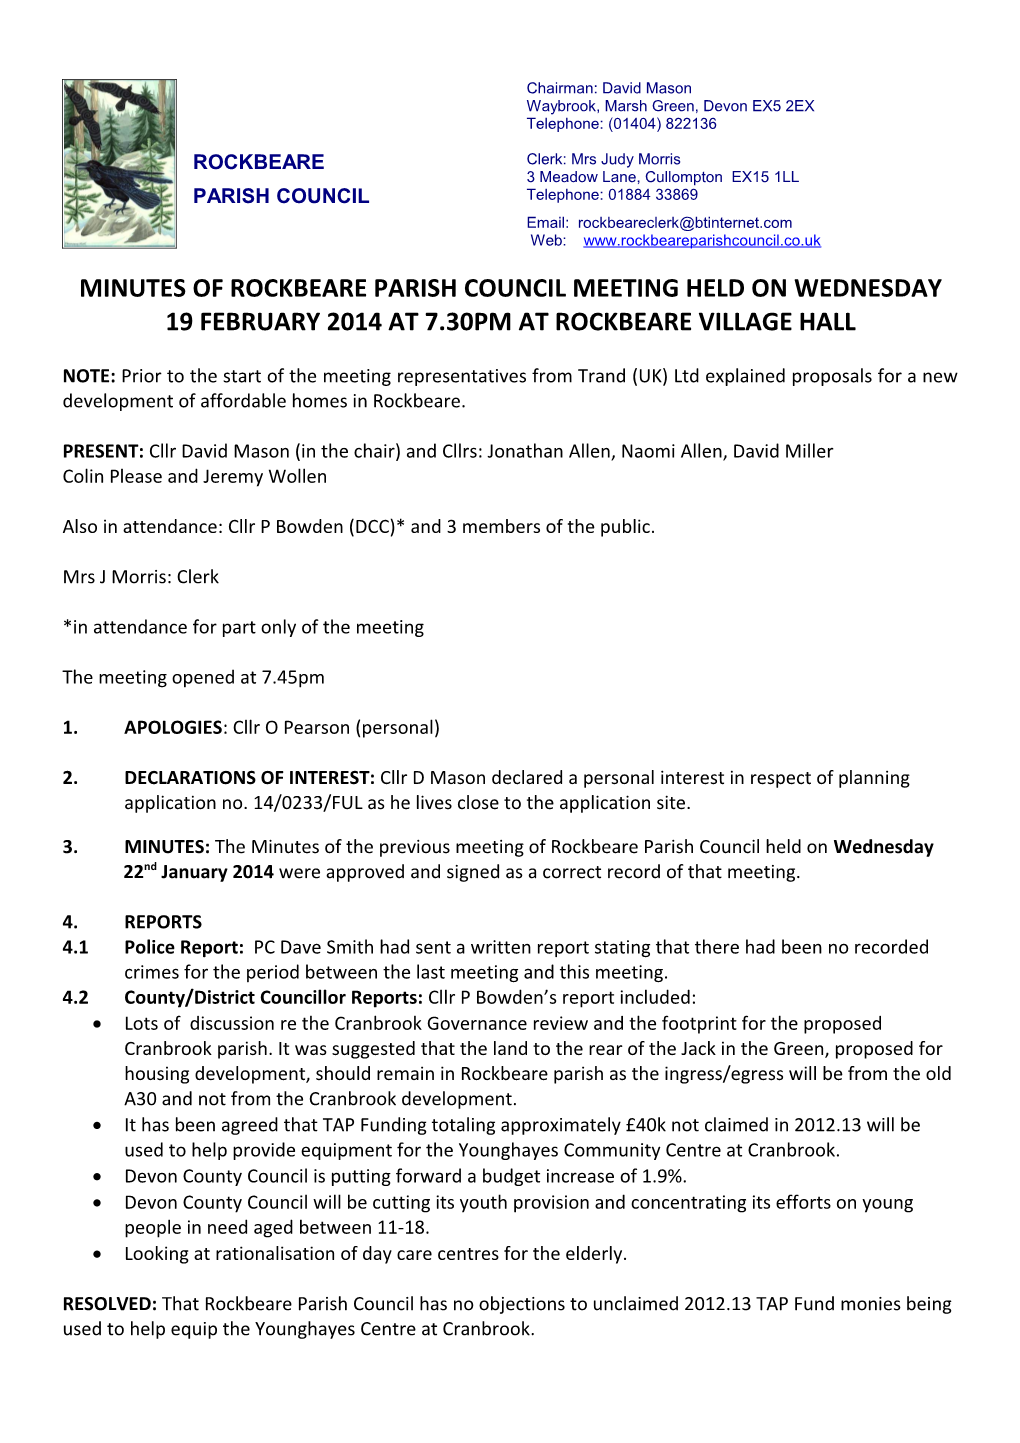 Minutes of Rockbeare Parish Council Meeting Held on Wednesday 19 February 2014 at 7.30Pm